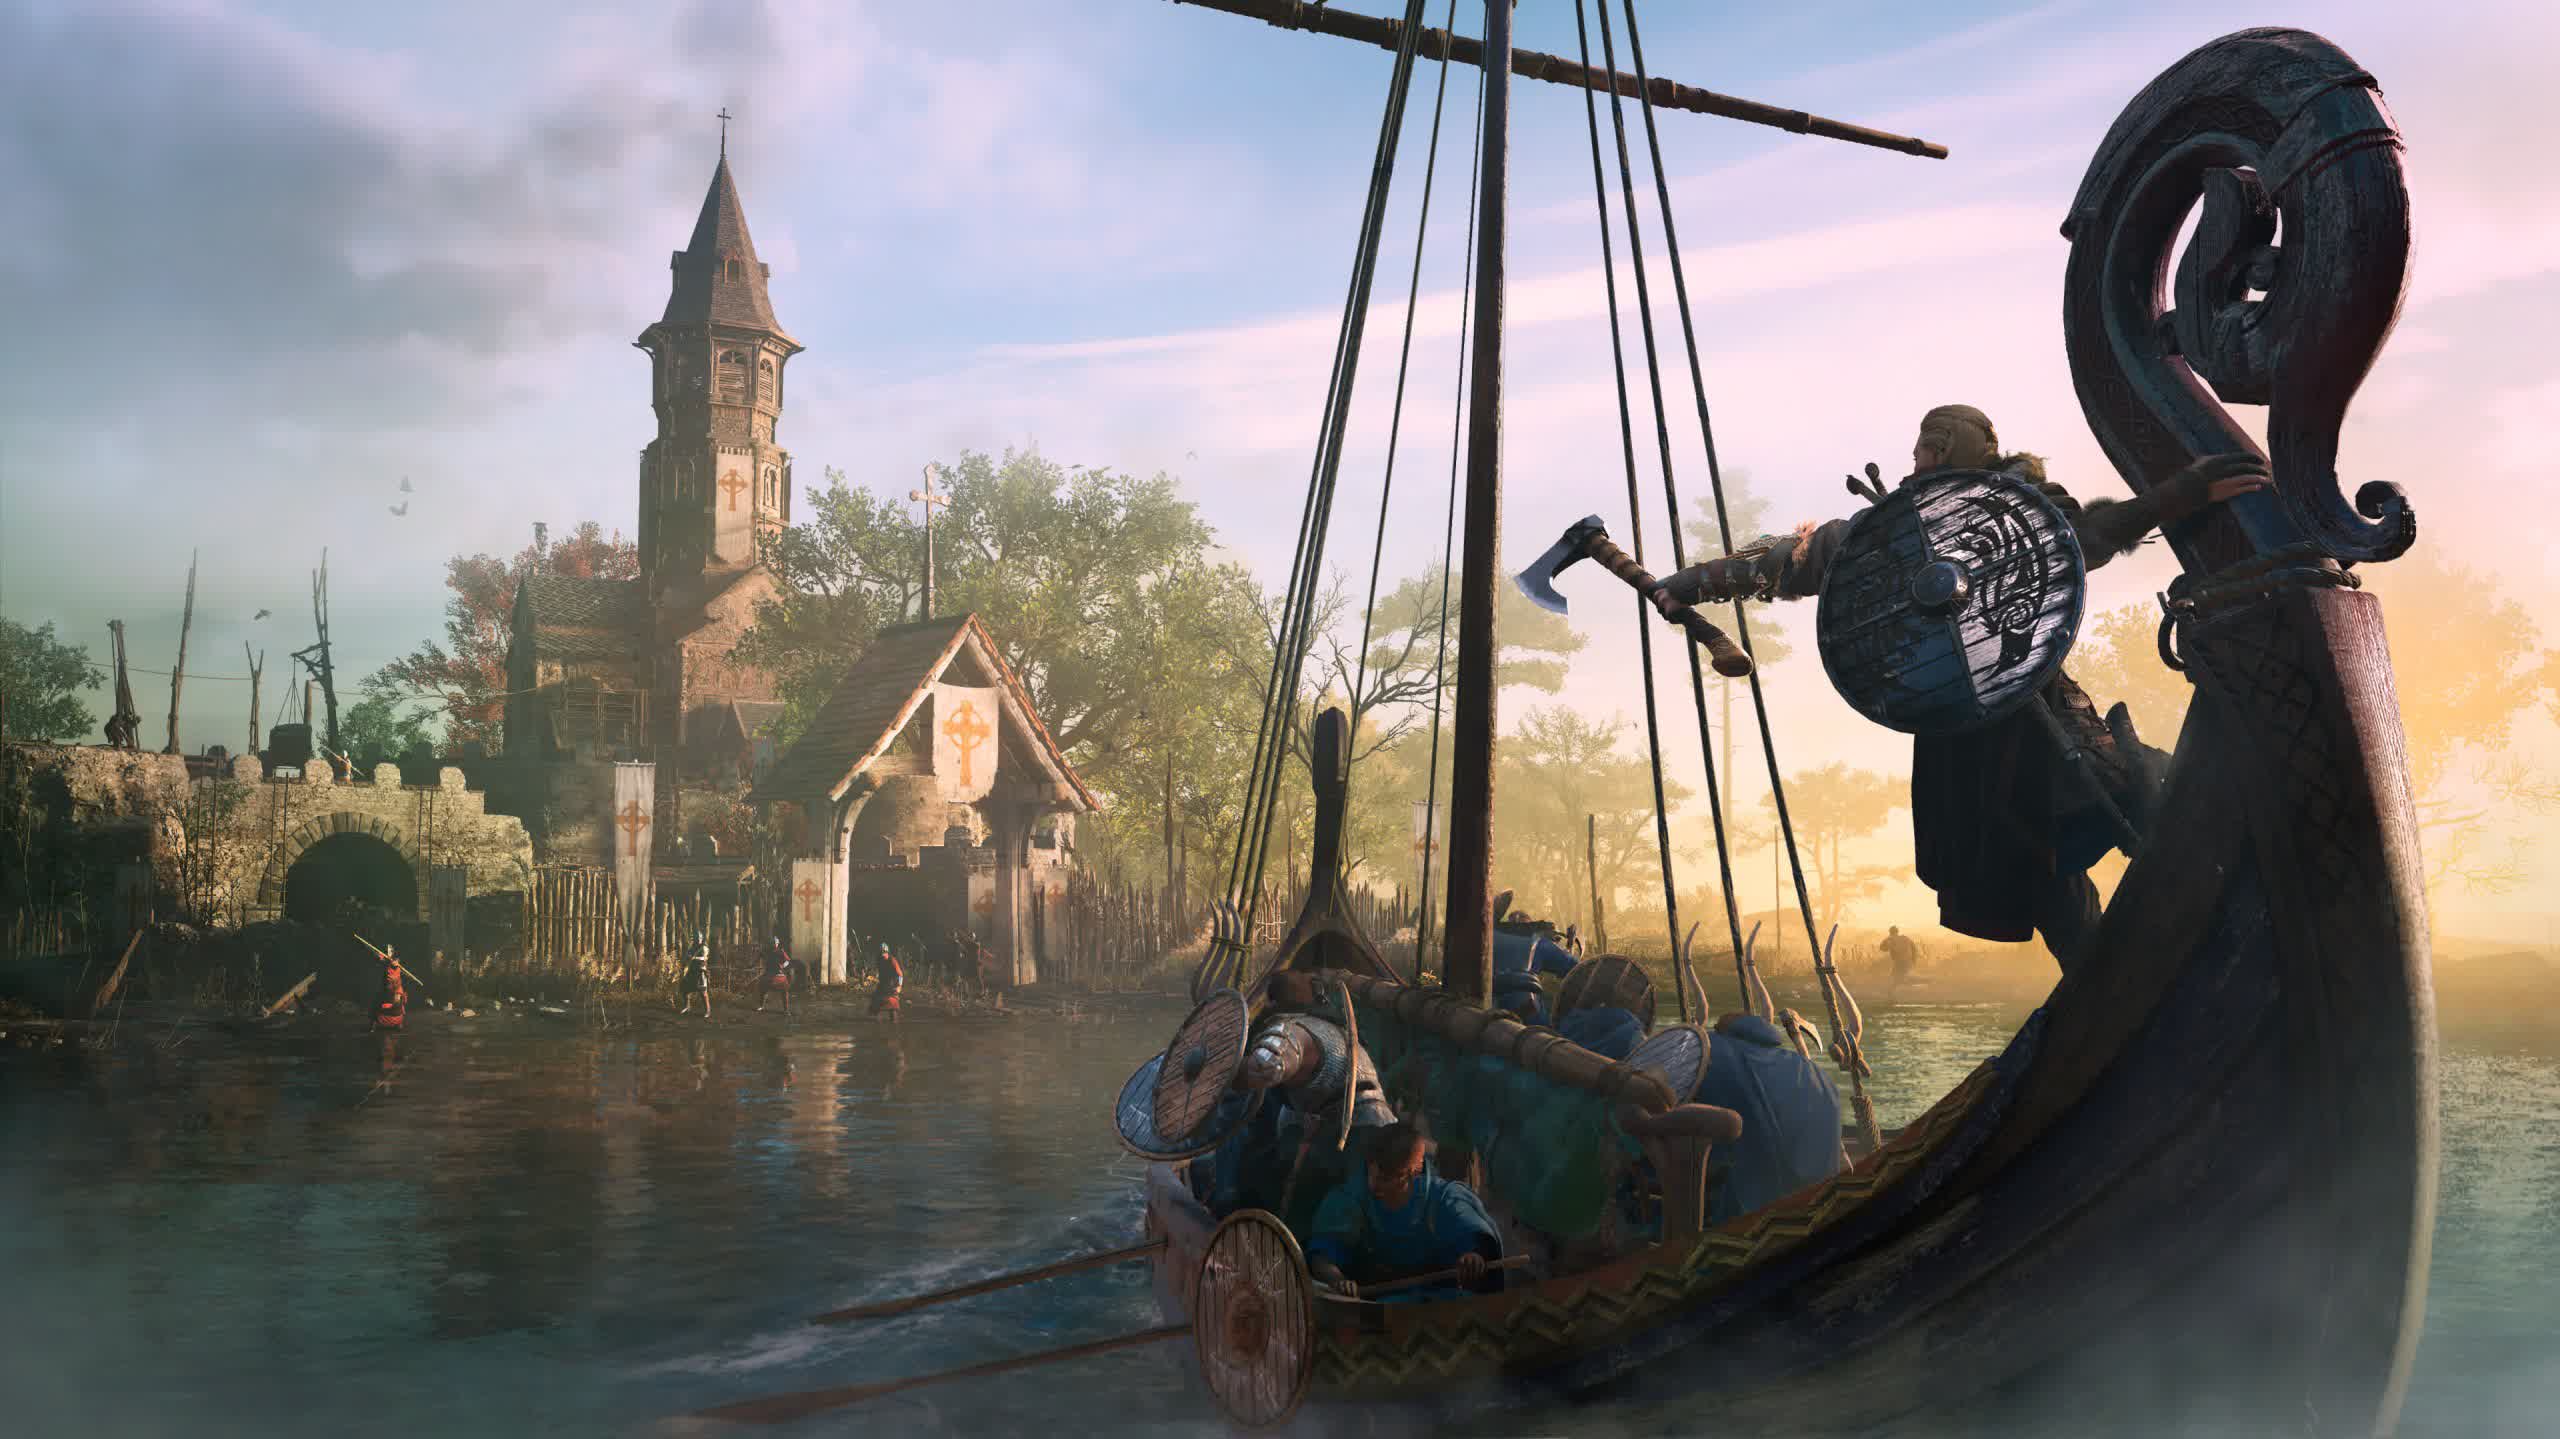 Ubisoft is returning to Steam, starting with Assassin's Creed Valhalla on December 6